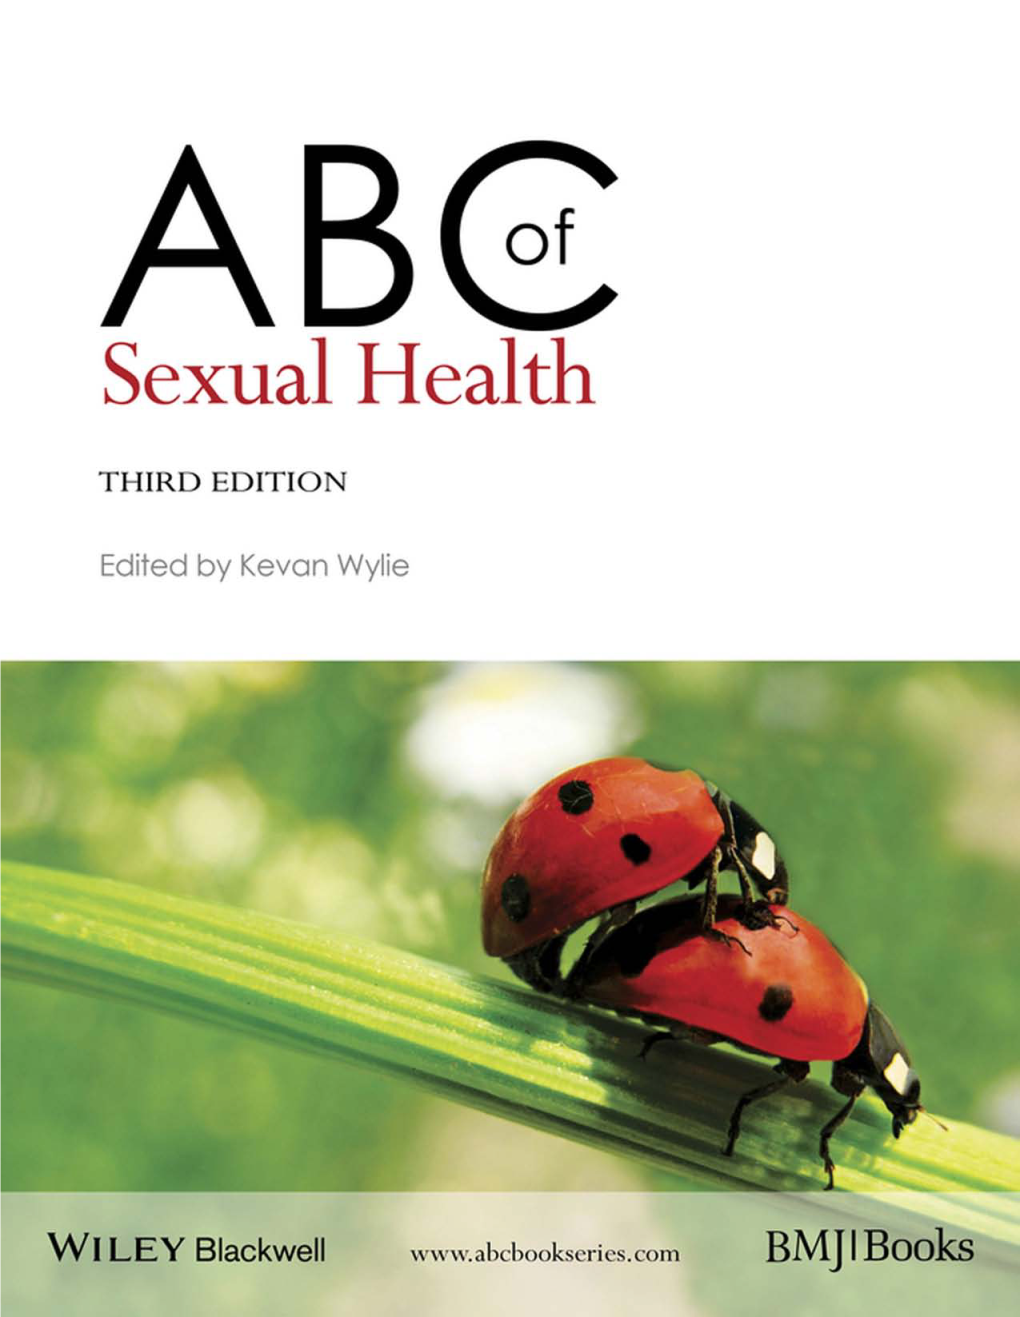 ABC of Sexual Health / Edited by Kevan Wylie